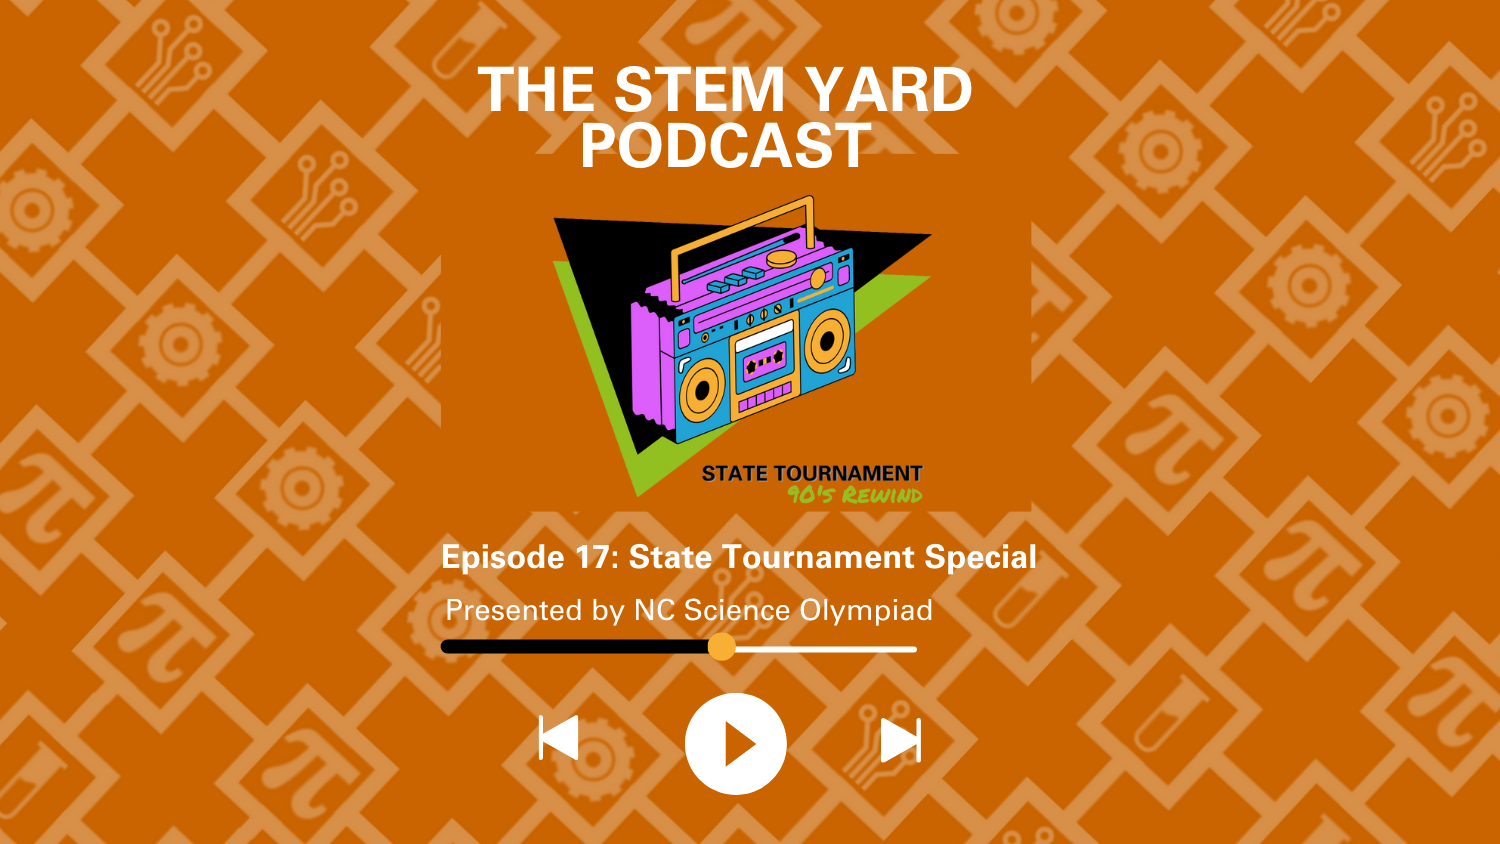 The STEM Yard Episode 17: State Tournament Special